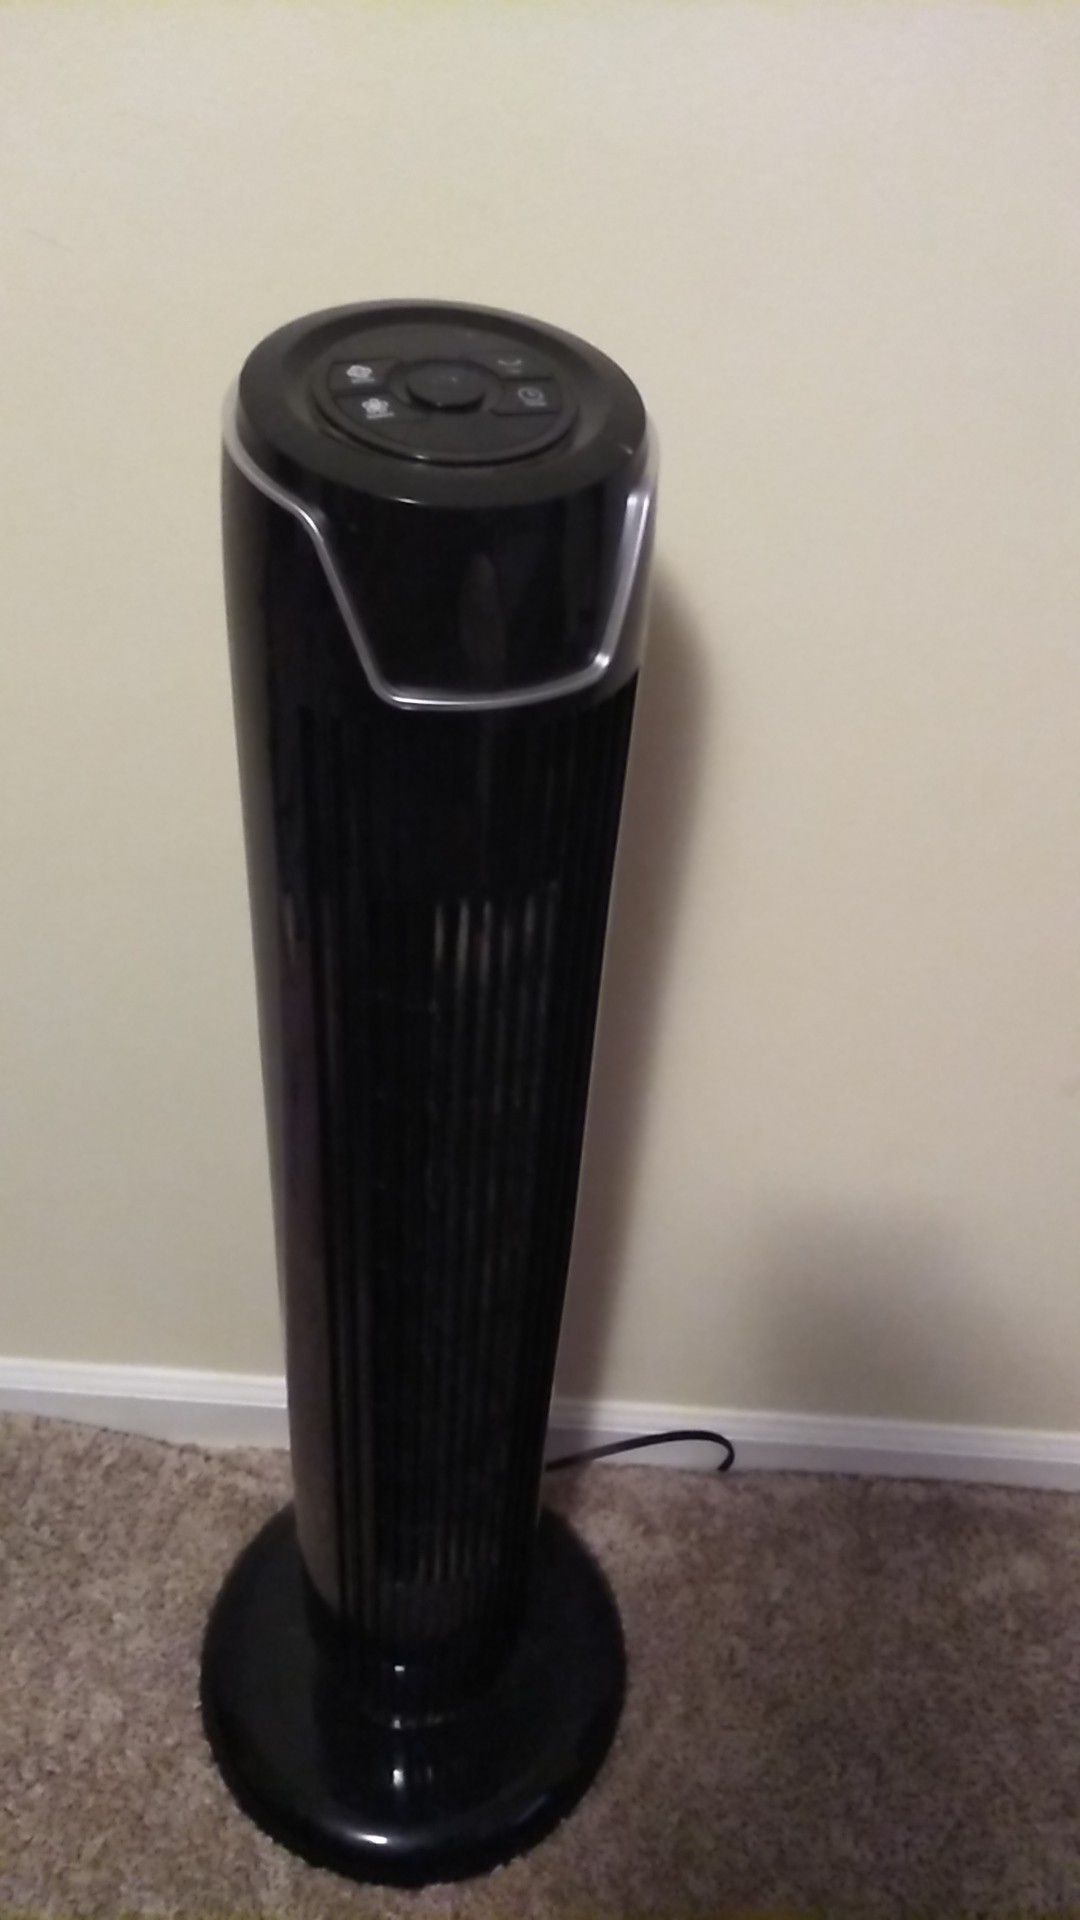 Mainstay tower fan.. no remote